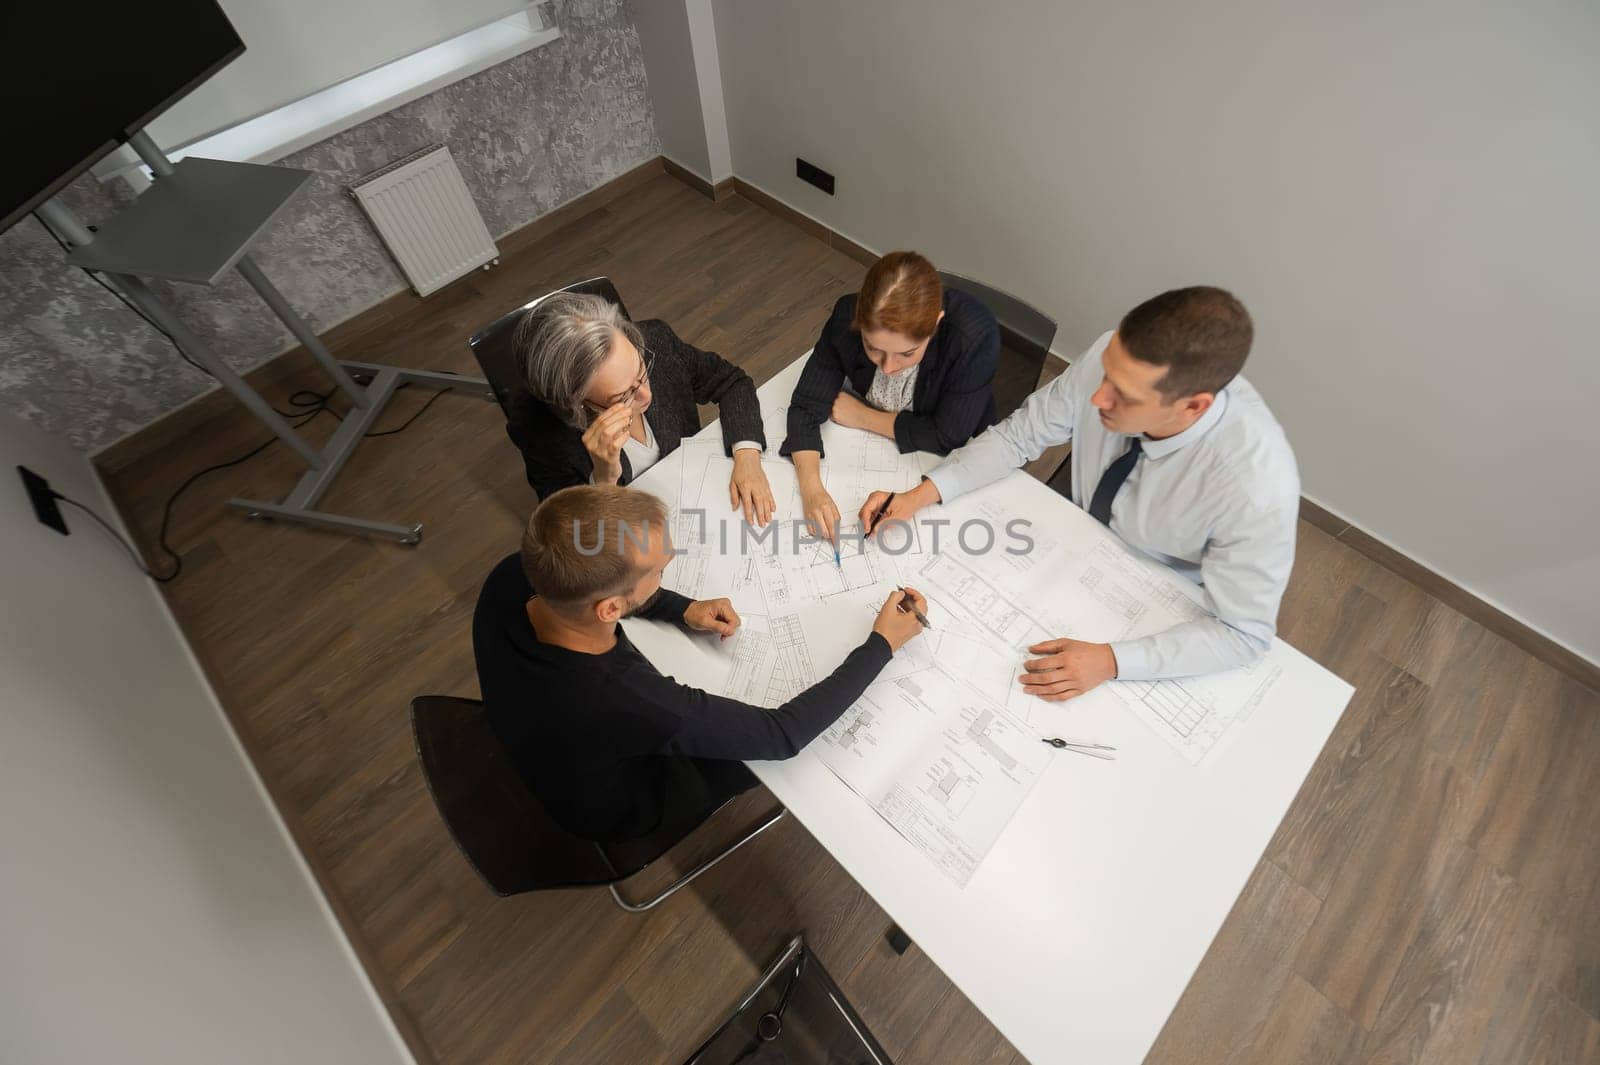 Top view of 4 business people sitting at a table and discussing blueprints. Designers engineers at a meeting